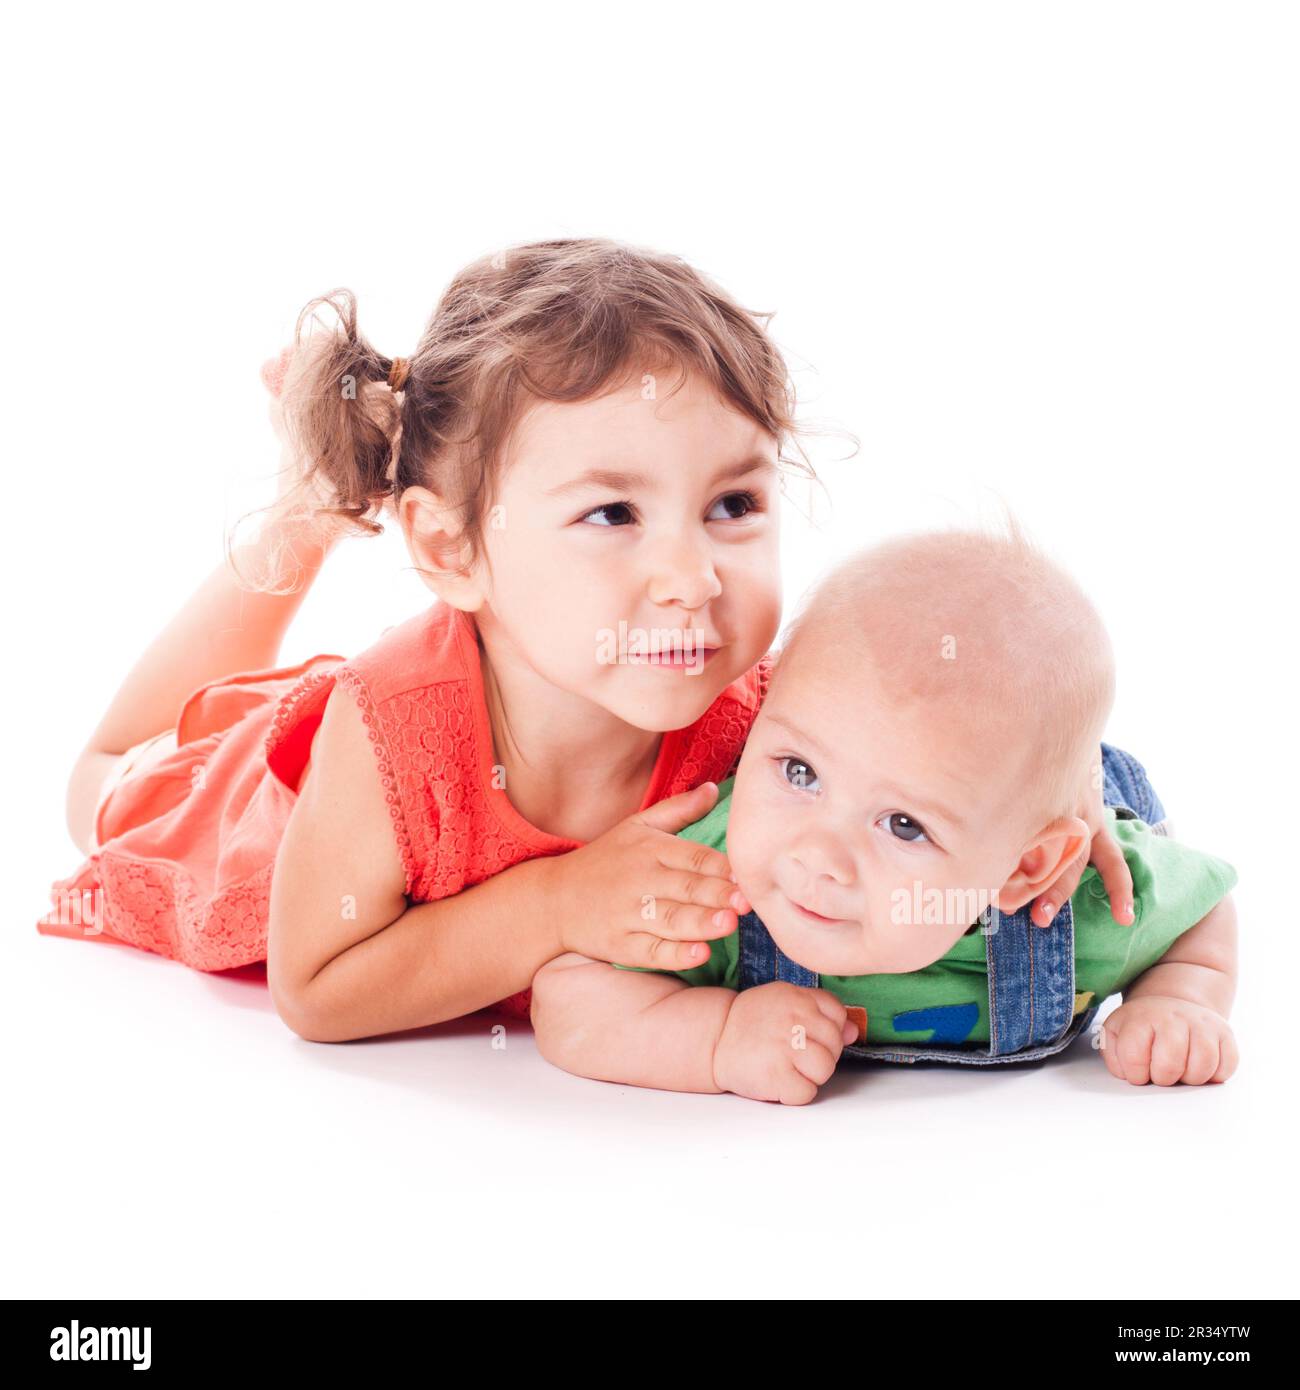 Sister and brother Stock Photo - Alamy